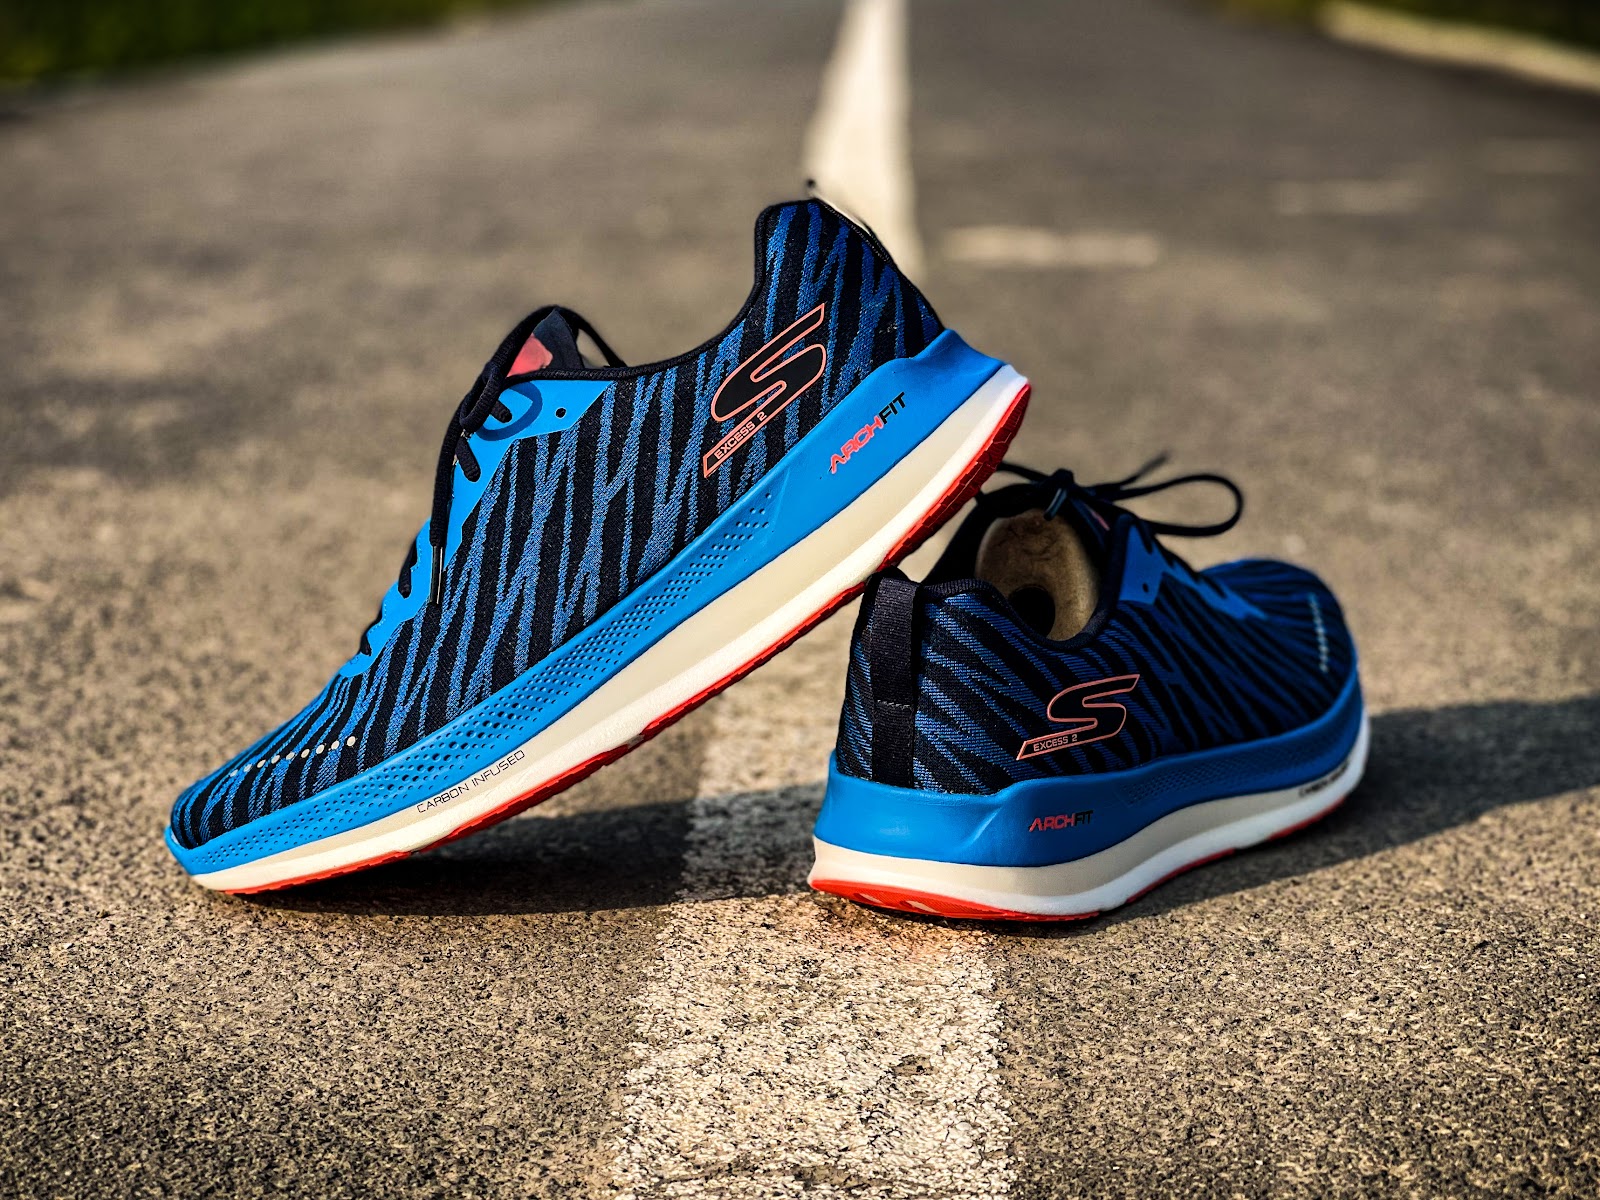 Road Run: Skechers GO Razor Excess 2 Multi Tester Review: New Carbon Infused Plate Performance & Rough Edges Gone! 12 Comparisons